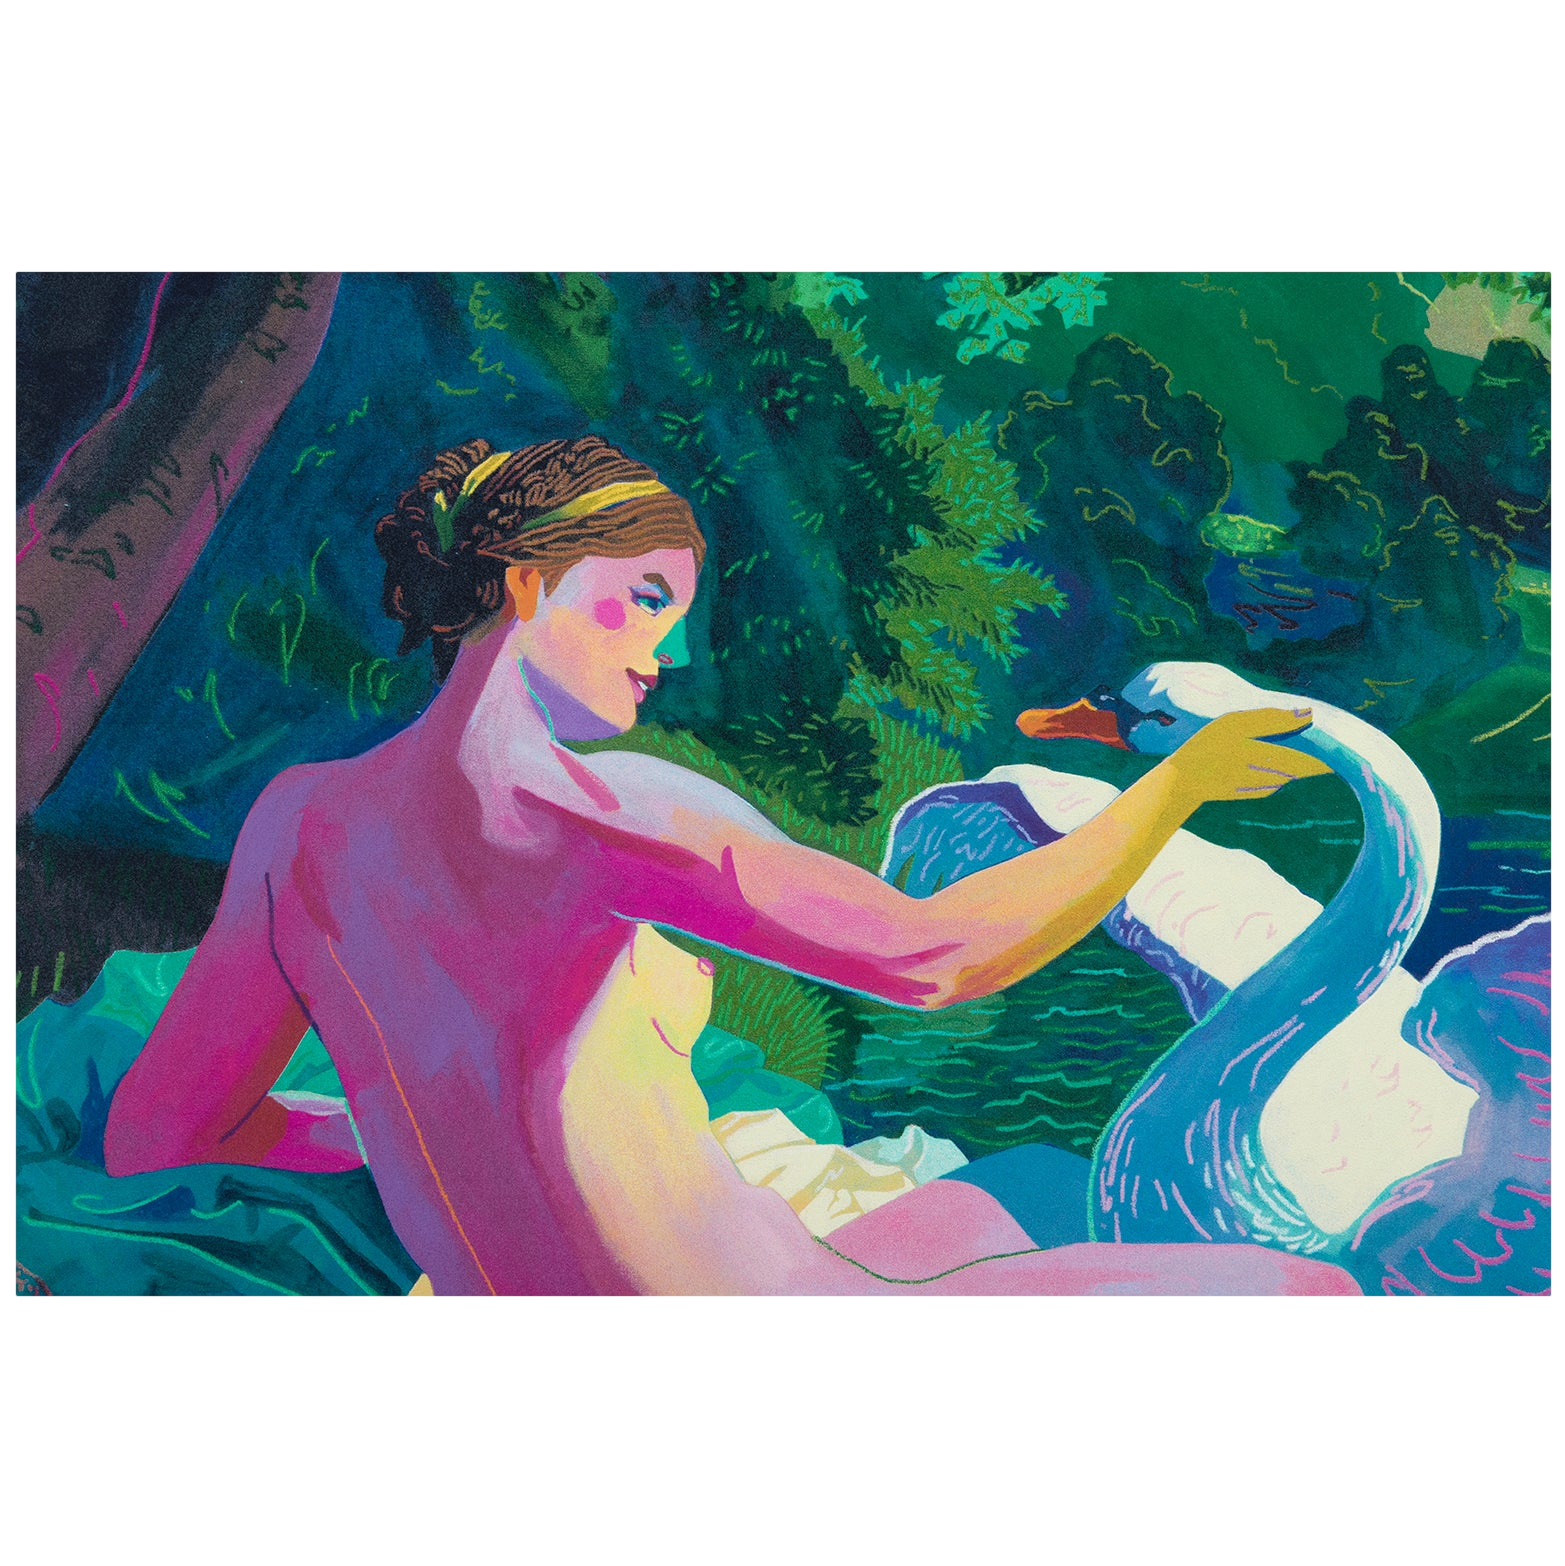 Andy Dixon "Leda and the Swan Painting"